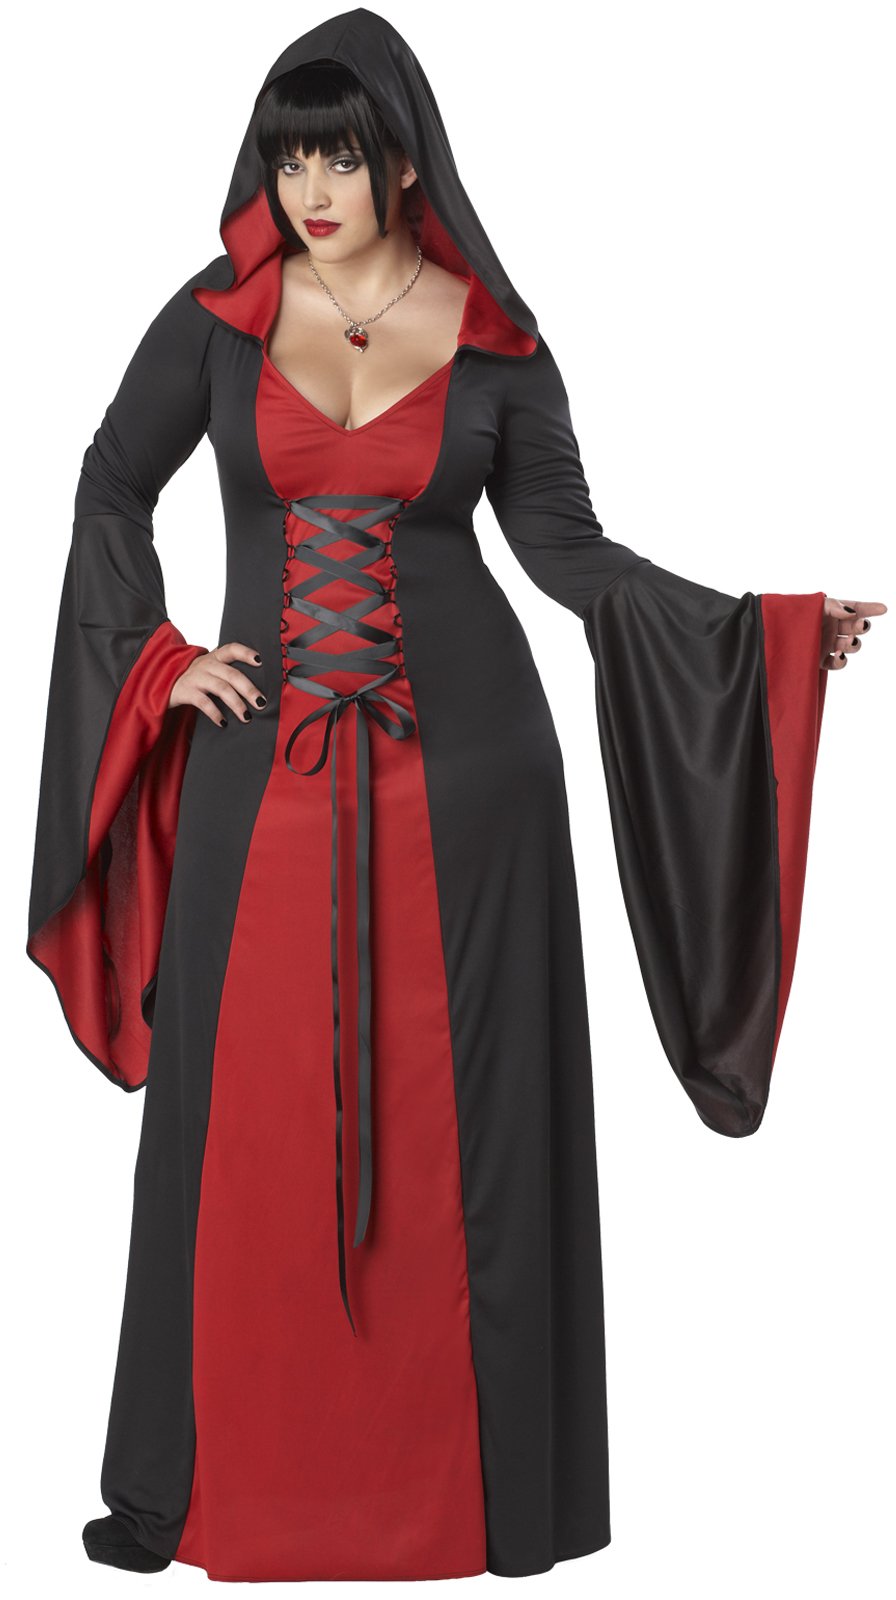 Deluxe Hooded Robe Adult Plus Costume - Click Image to Close